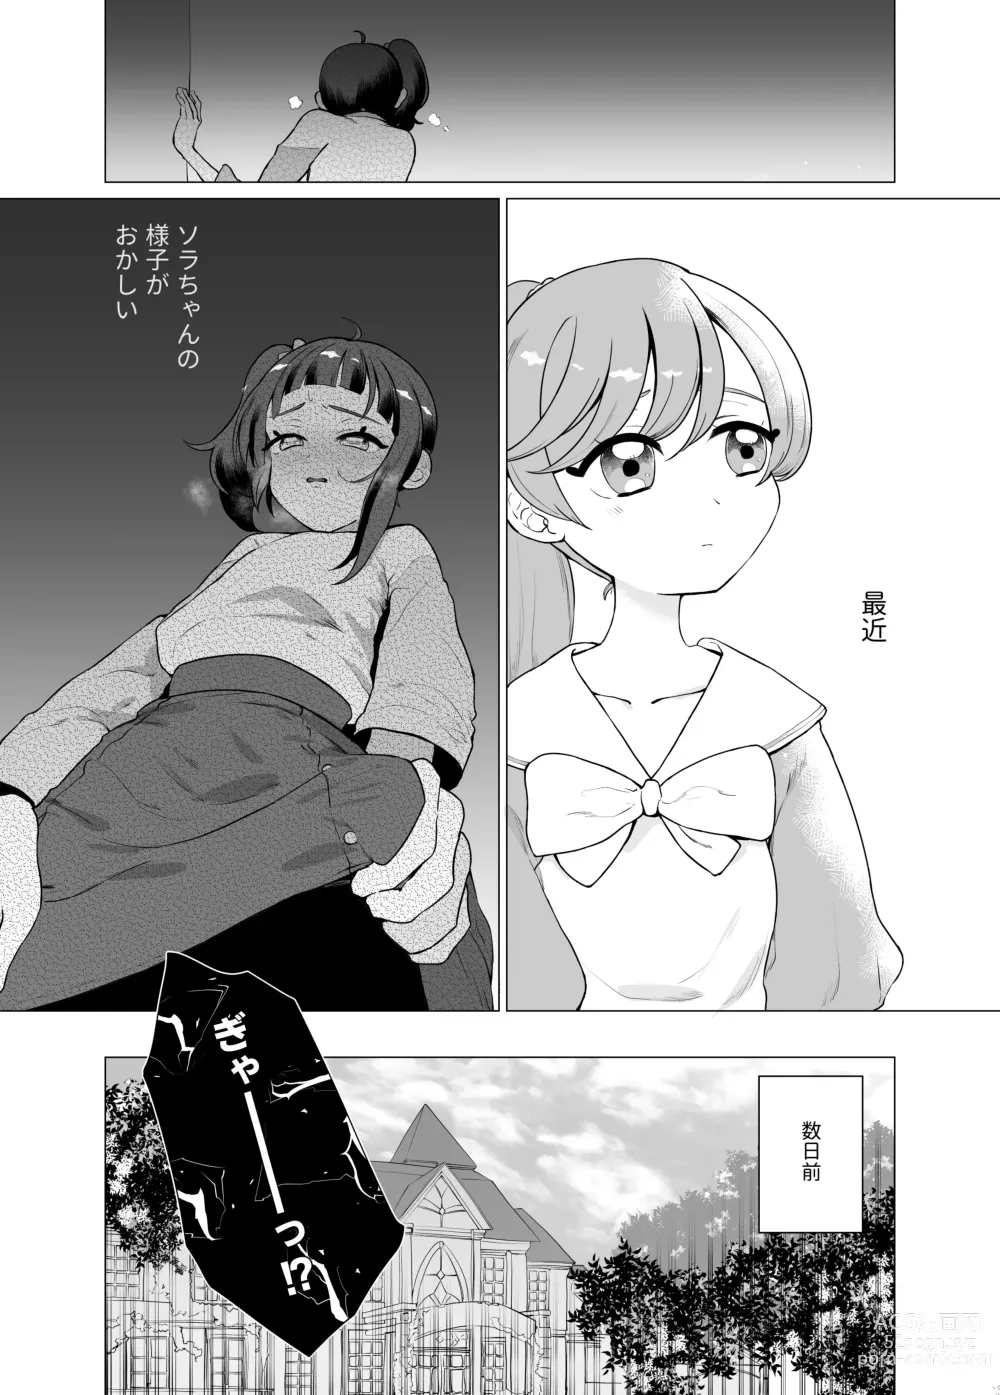 Page 5 of doujinshi Immoral Cute Aggression